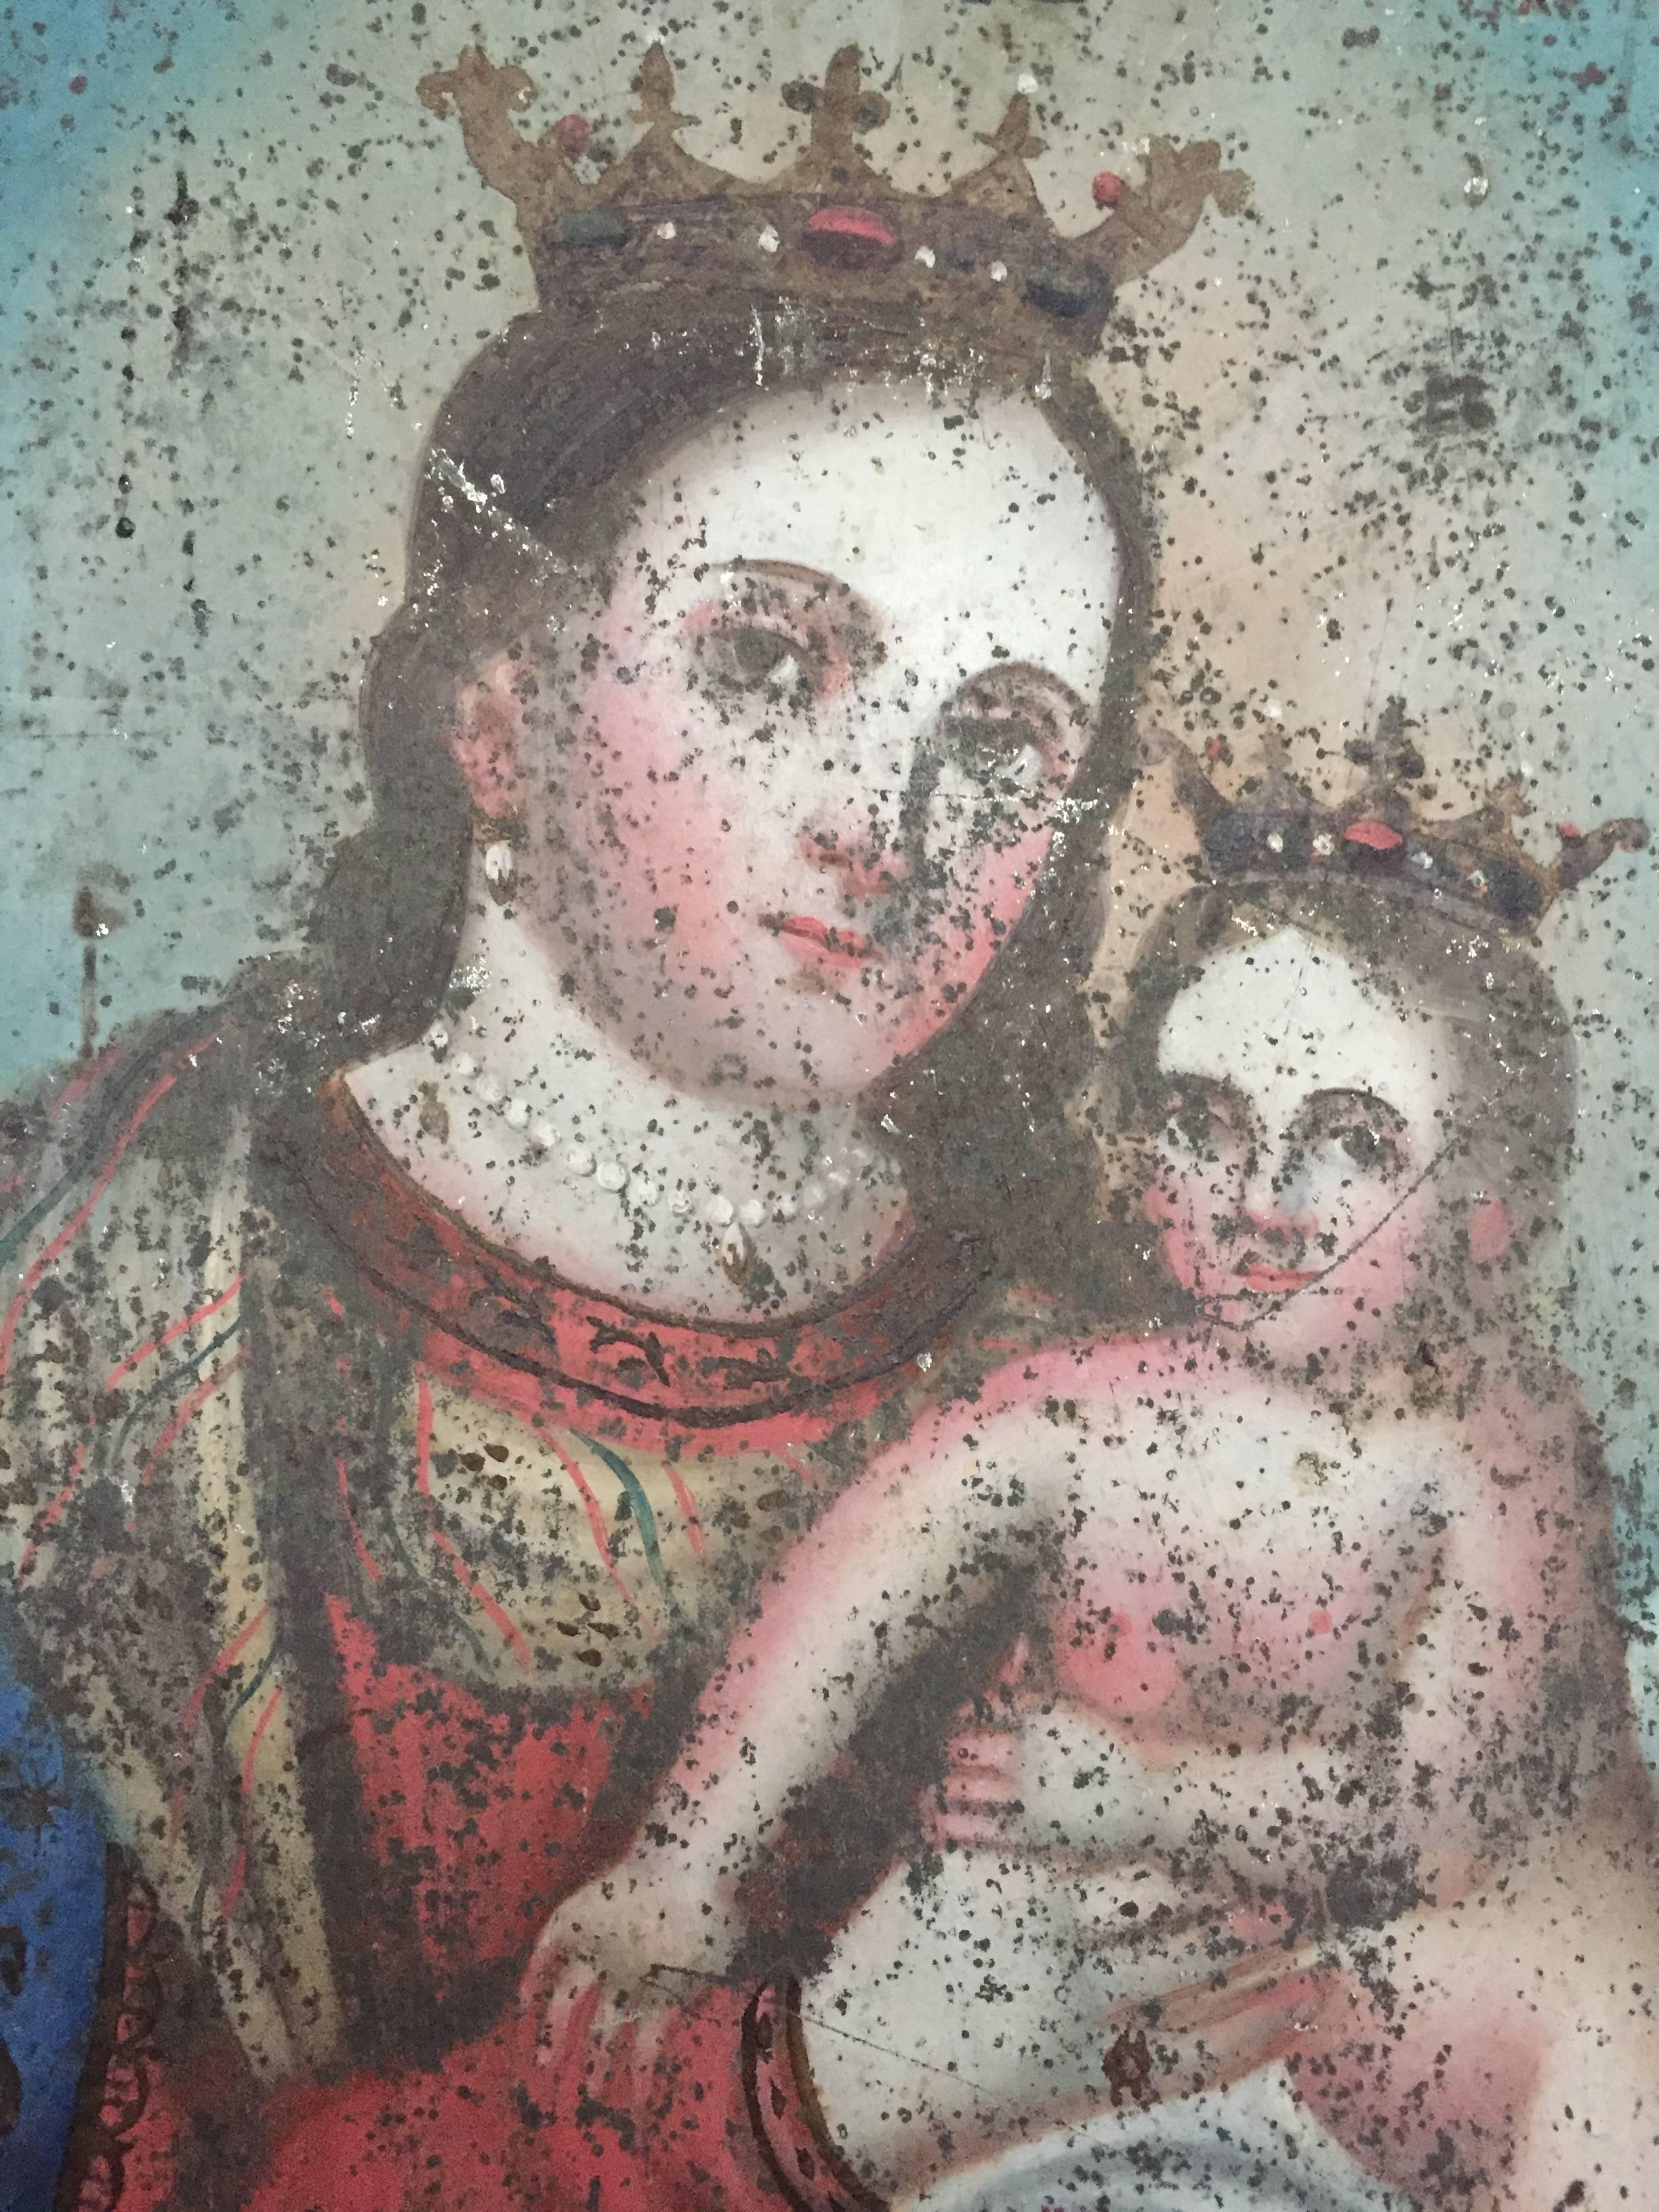 A very fine Spanish retablo painting on tin of the Maria and child. Elegant angular faces indicative of early 19th century religious painting.